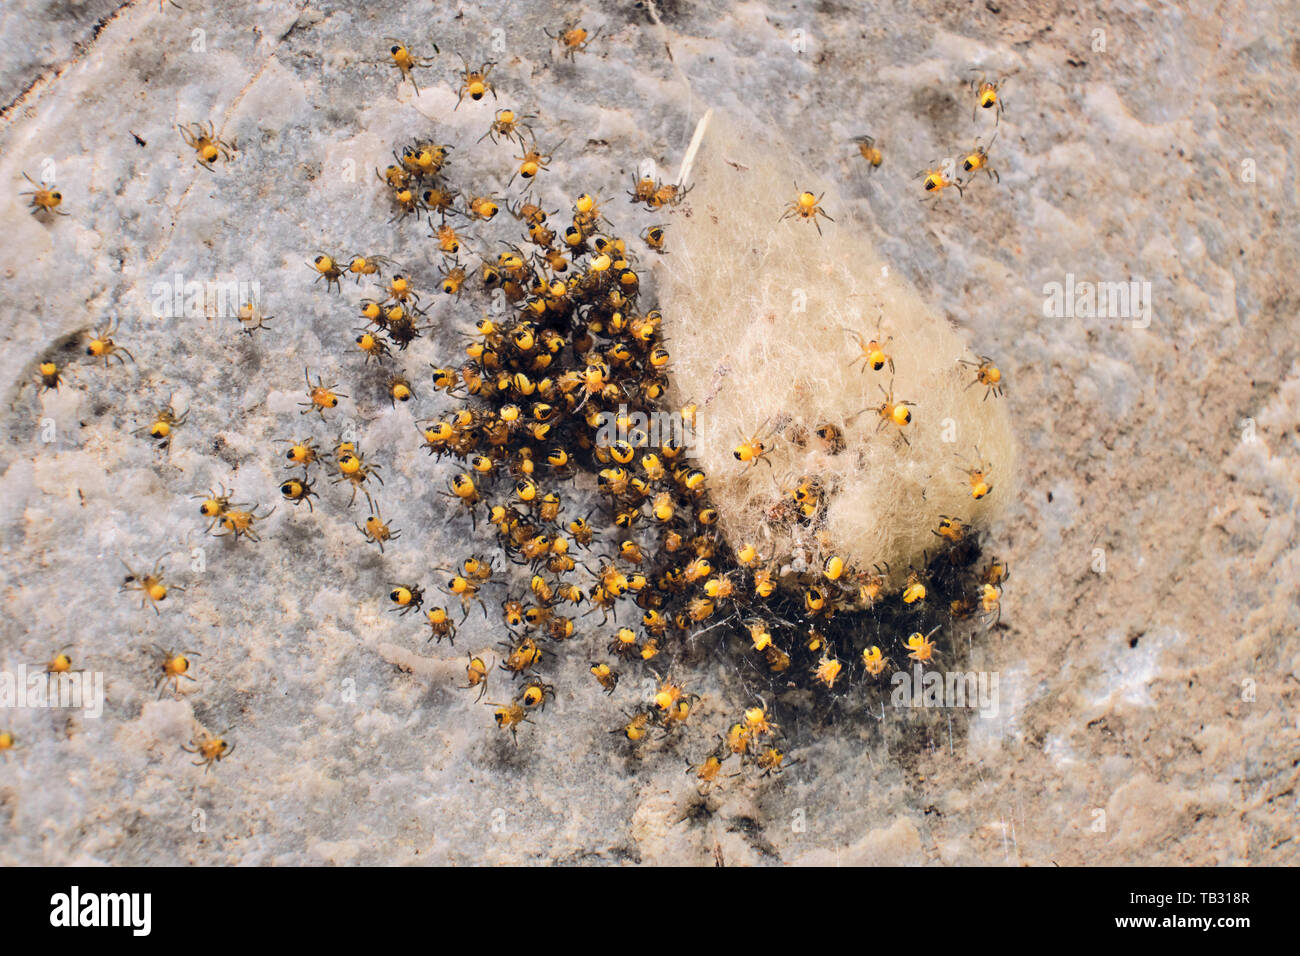 A nest of baby gardens spiders leaving their spun orb stuck to limestone. Stock Photo